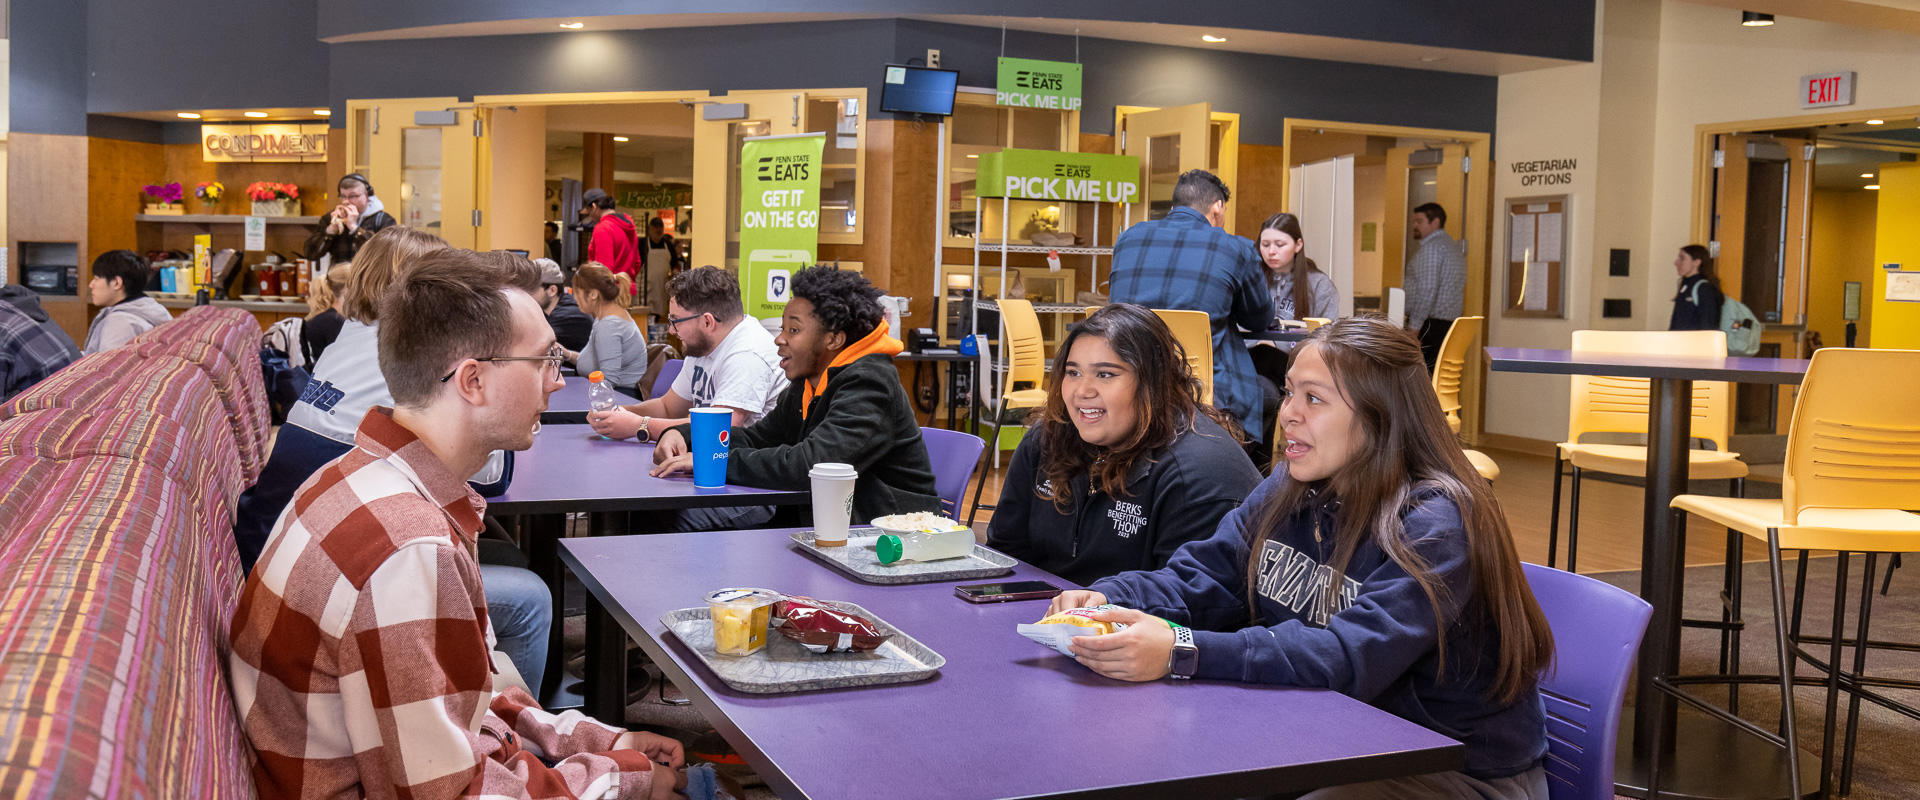 Students socializing in the dining area at Berks campus